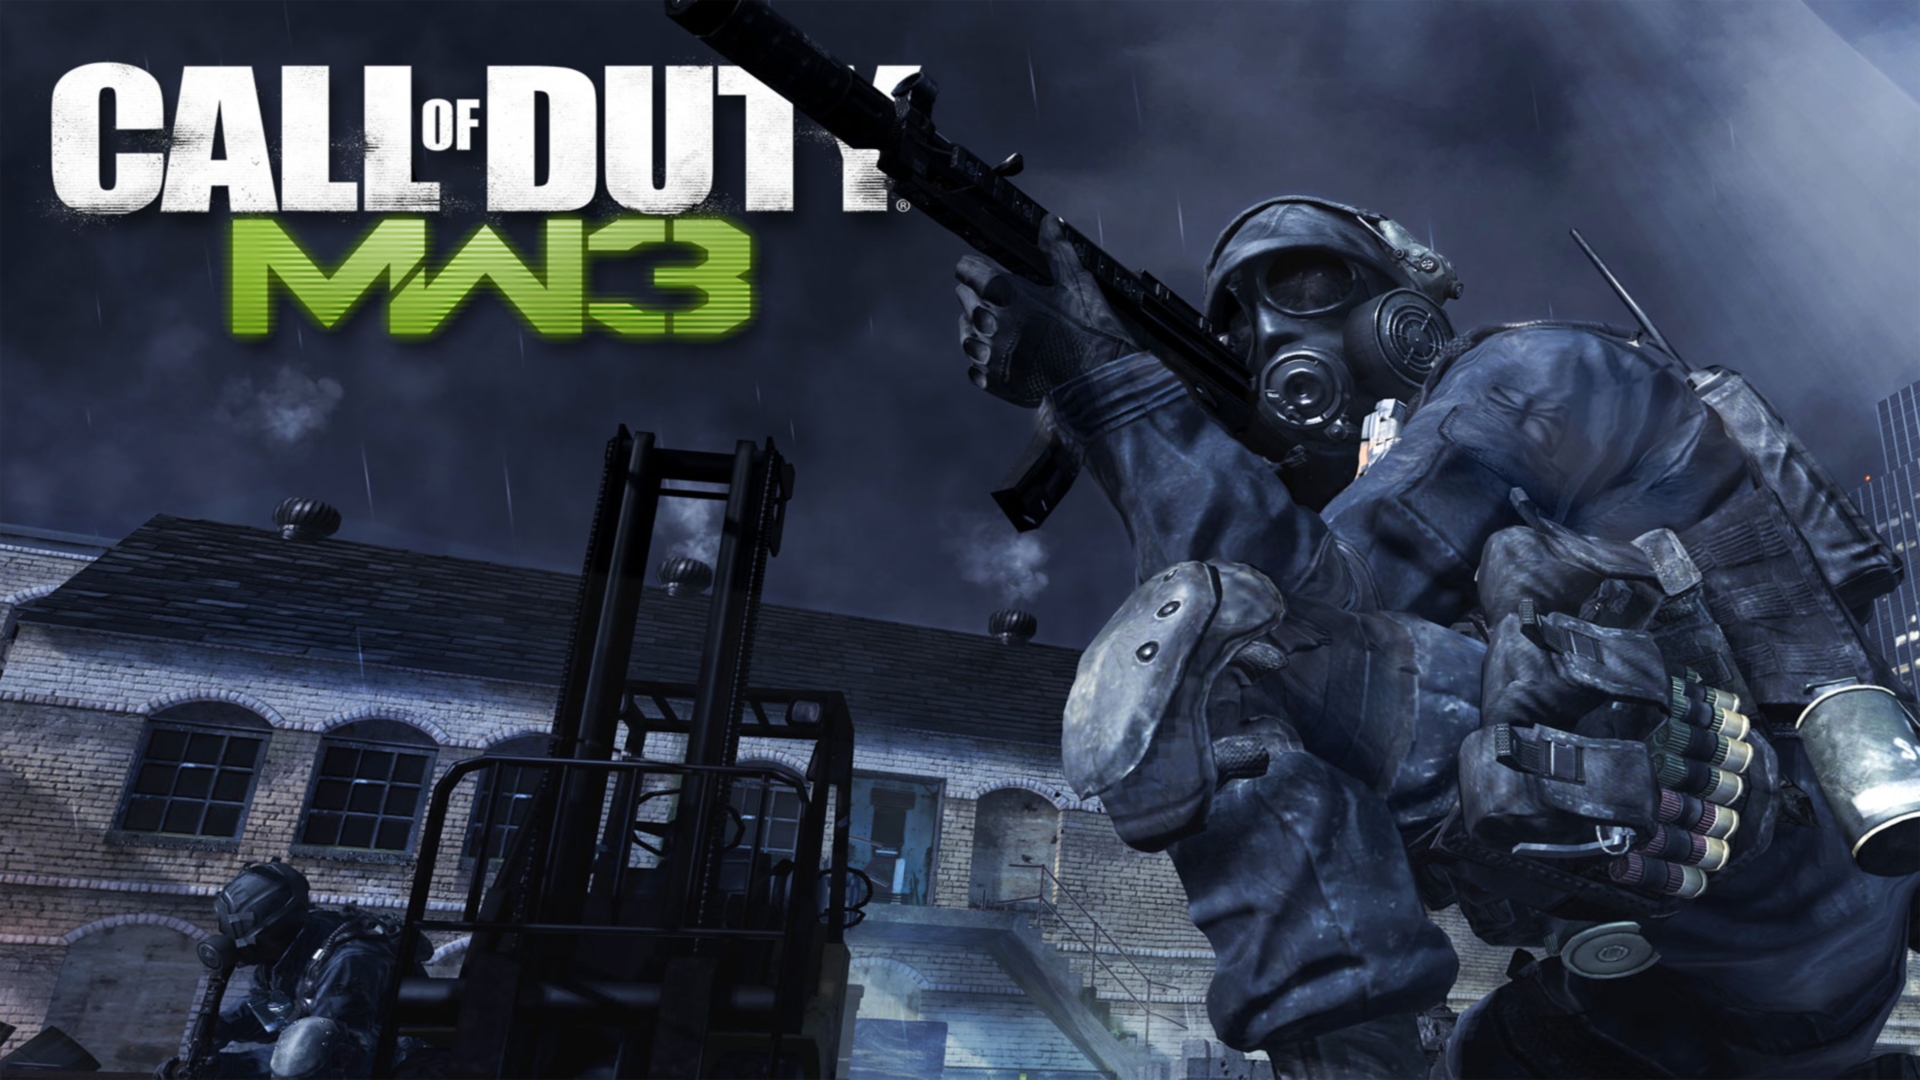 Call Of Duty Modern Warfare 3 Wallpaper for PC Full HD Pictures